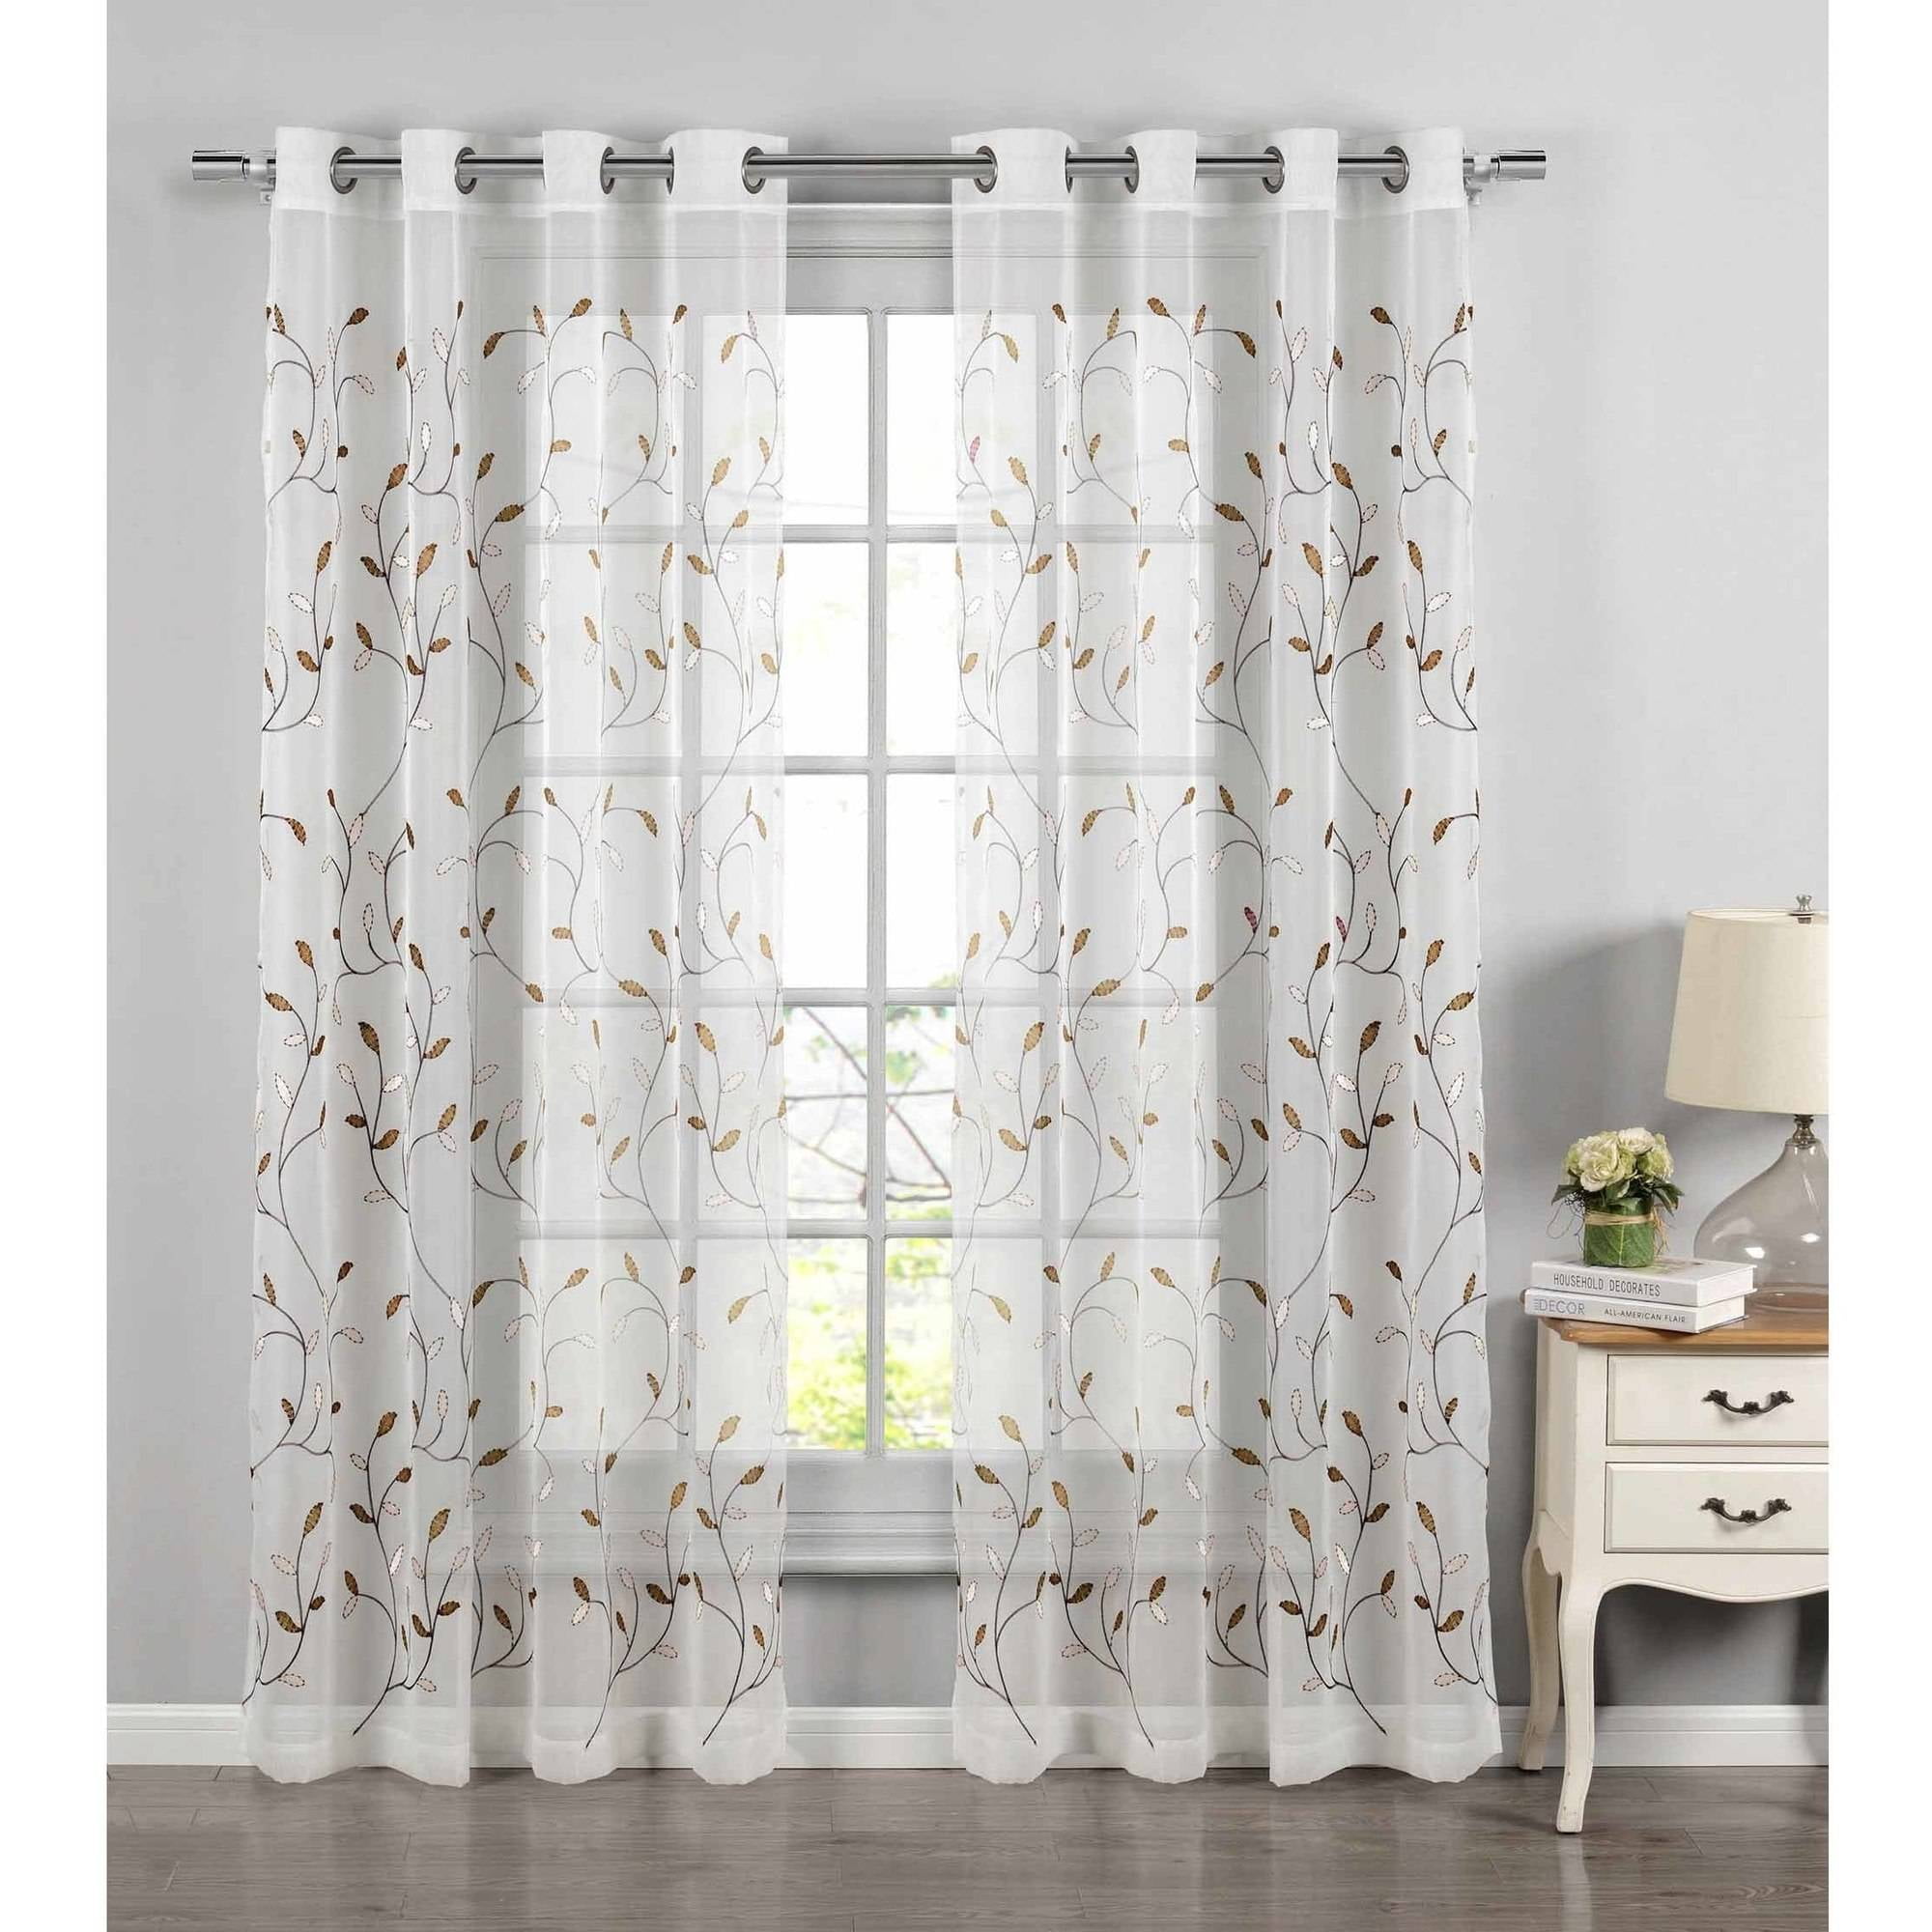 60 Inch Wide Curtain Panels Inch Extra Wide Blackout Curtains 60 Inch